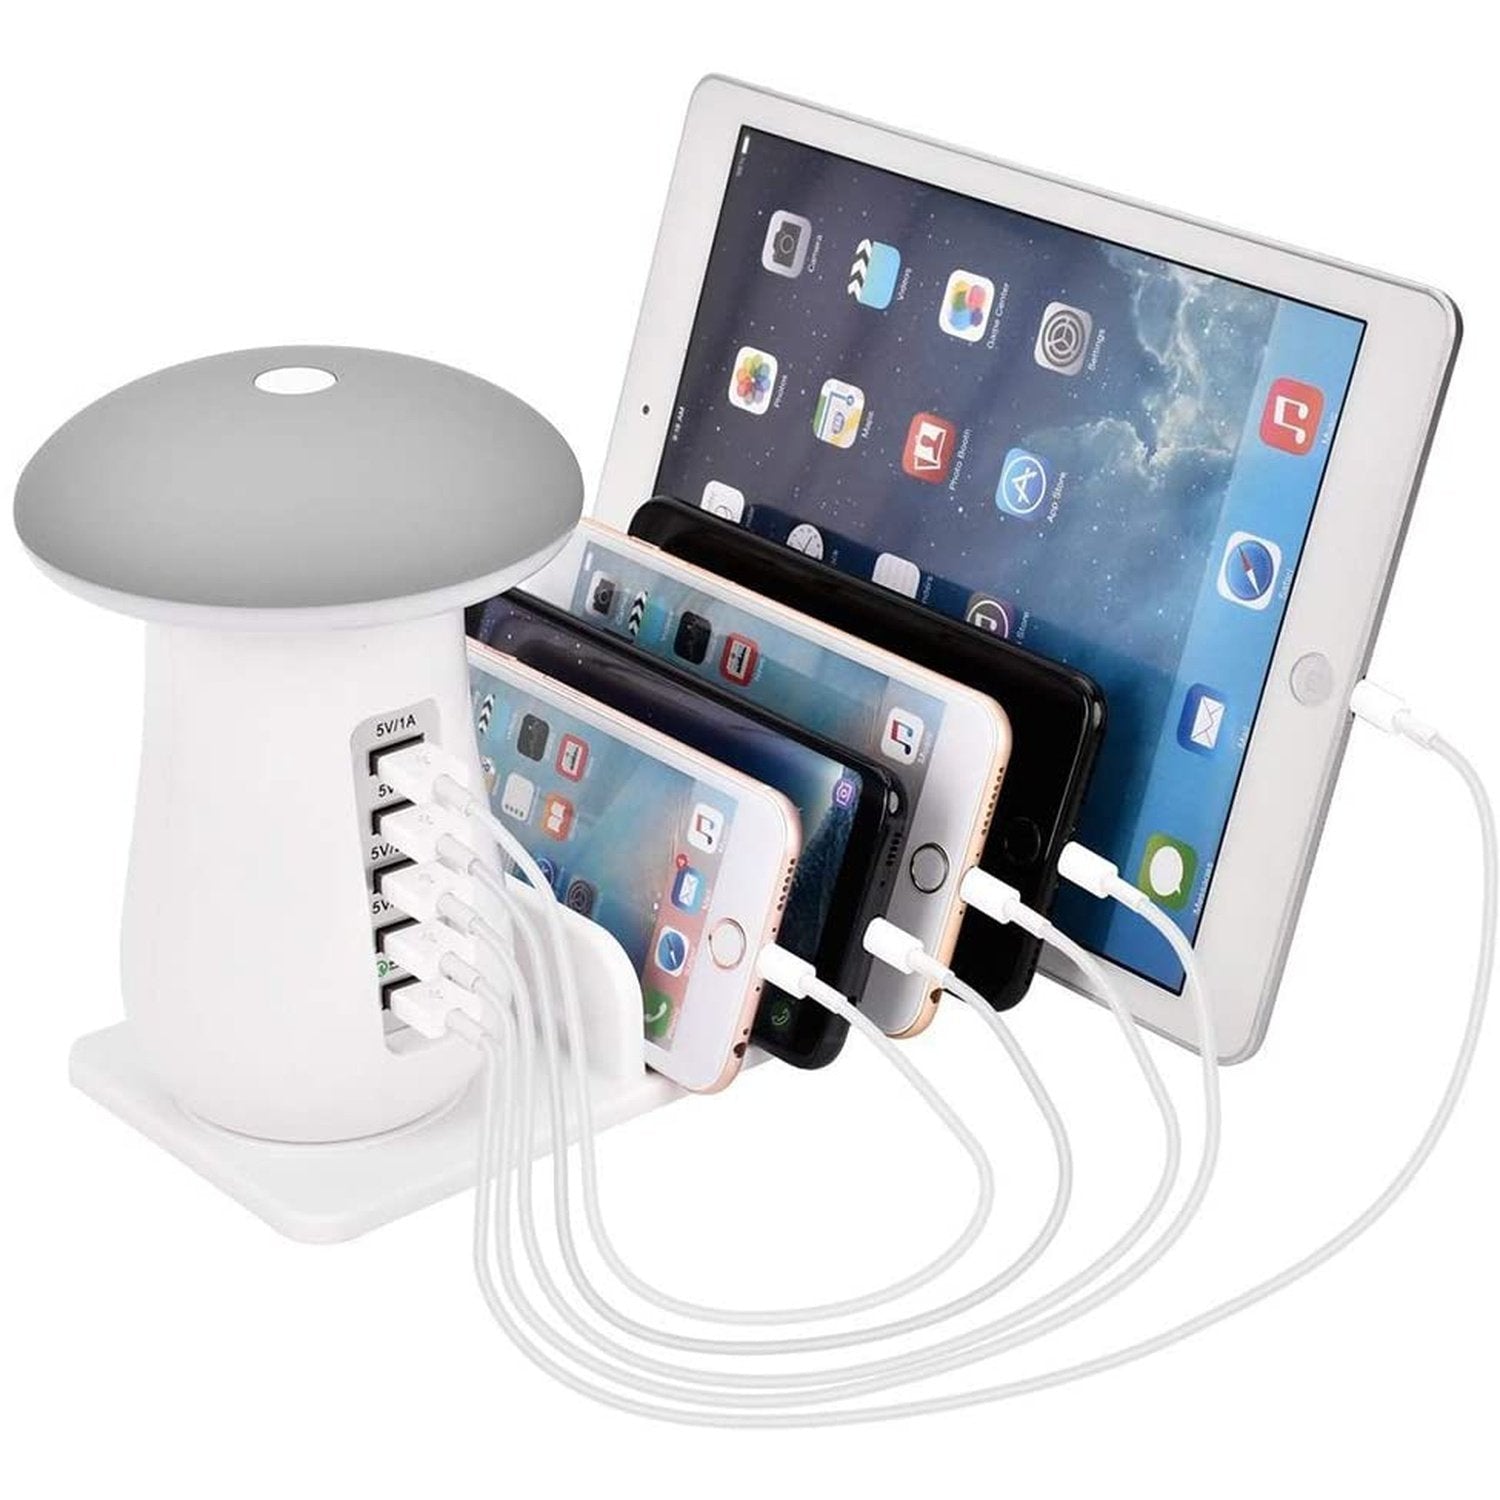 Multi Port Mushroom Lamp Charging Dock Station Phone Charger for Apple iPhone, Apple iPad, Samsung Galaxy and Note, Google Pixel, LG, HTC, Microsoft